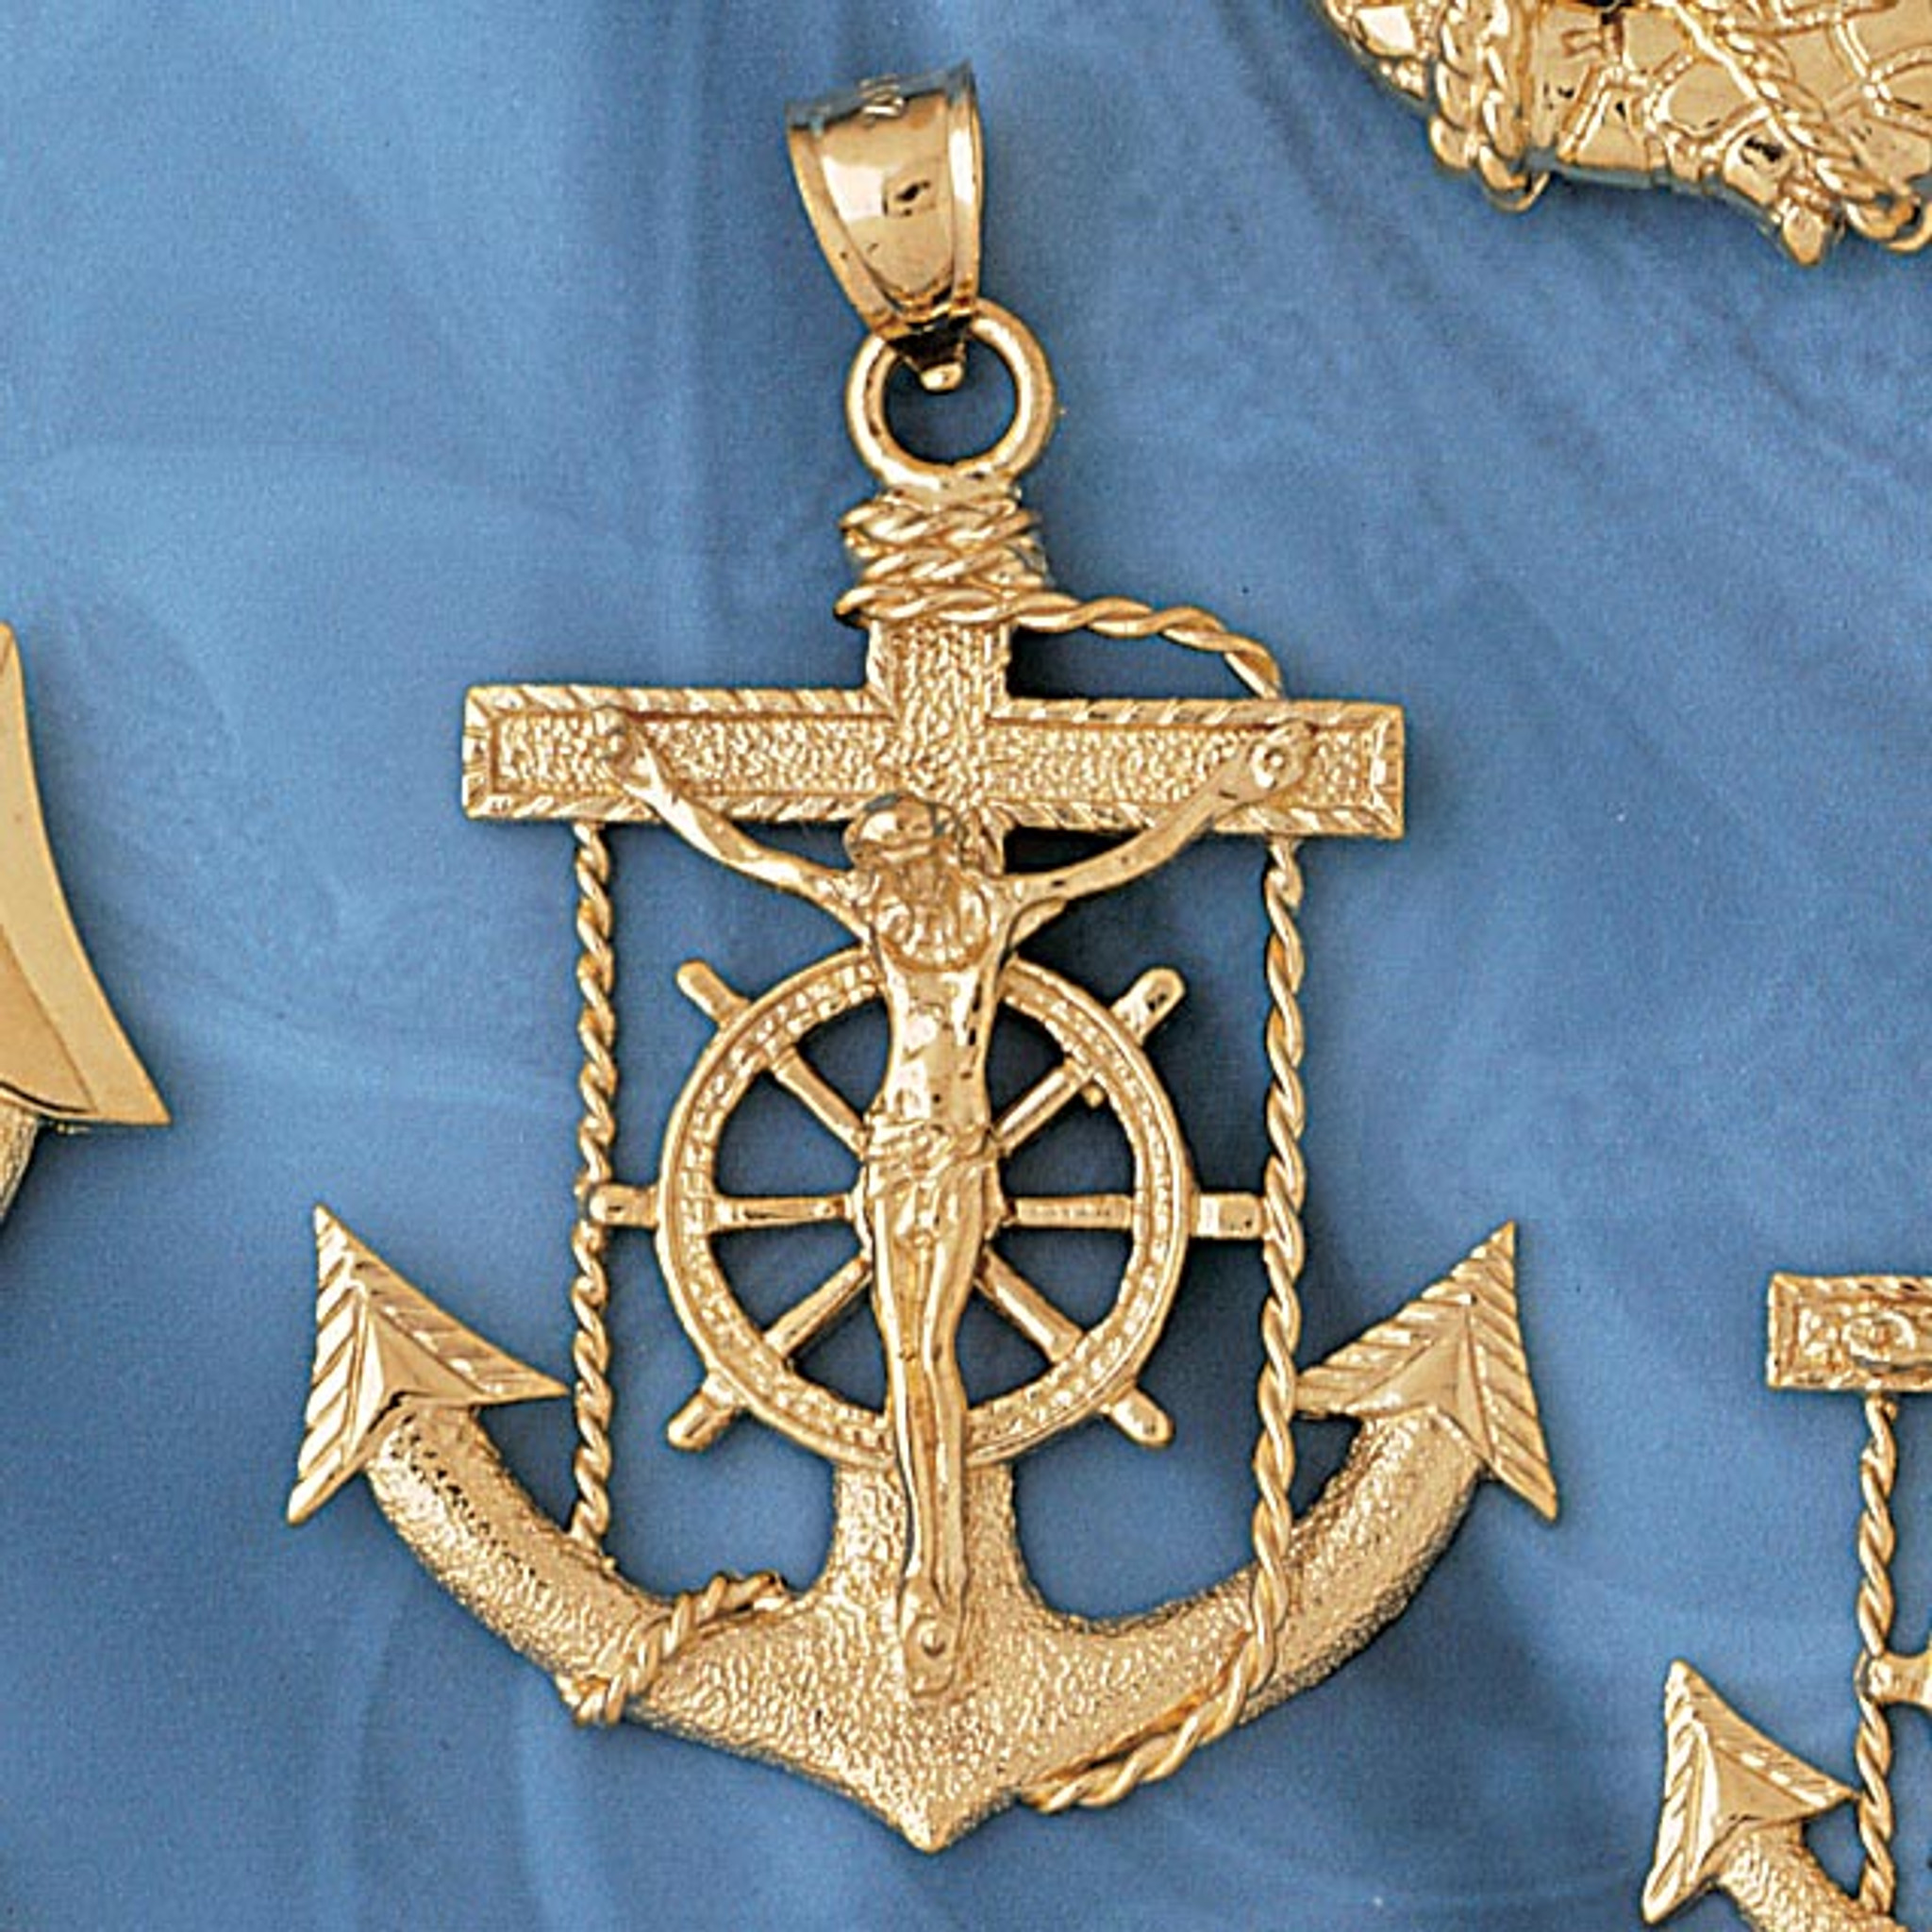 10 Anchor Charms Gold Tone Lovely Detailling GC369 